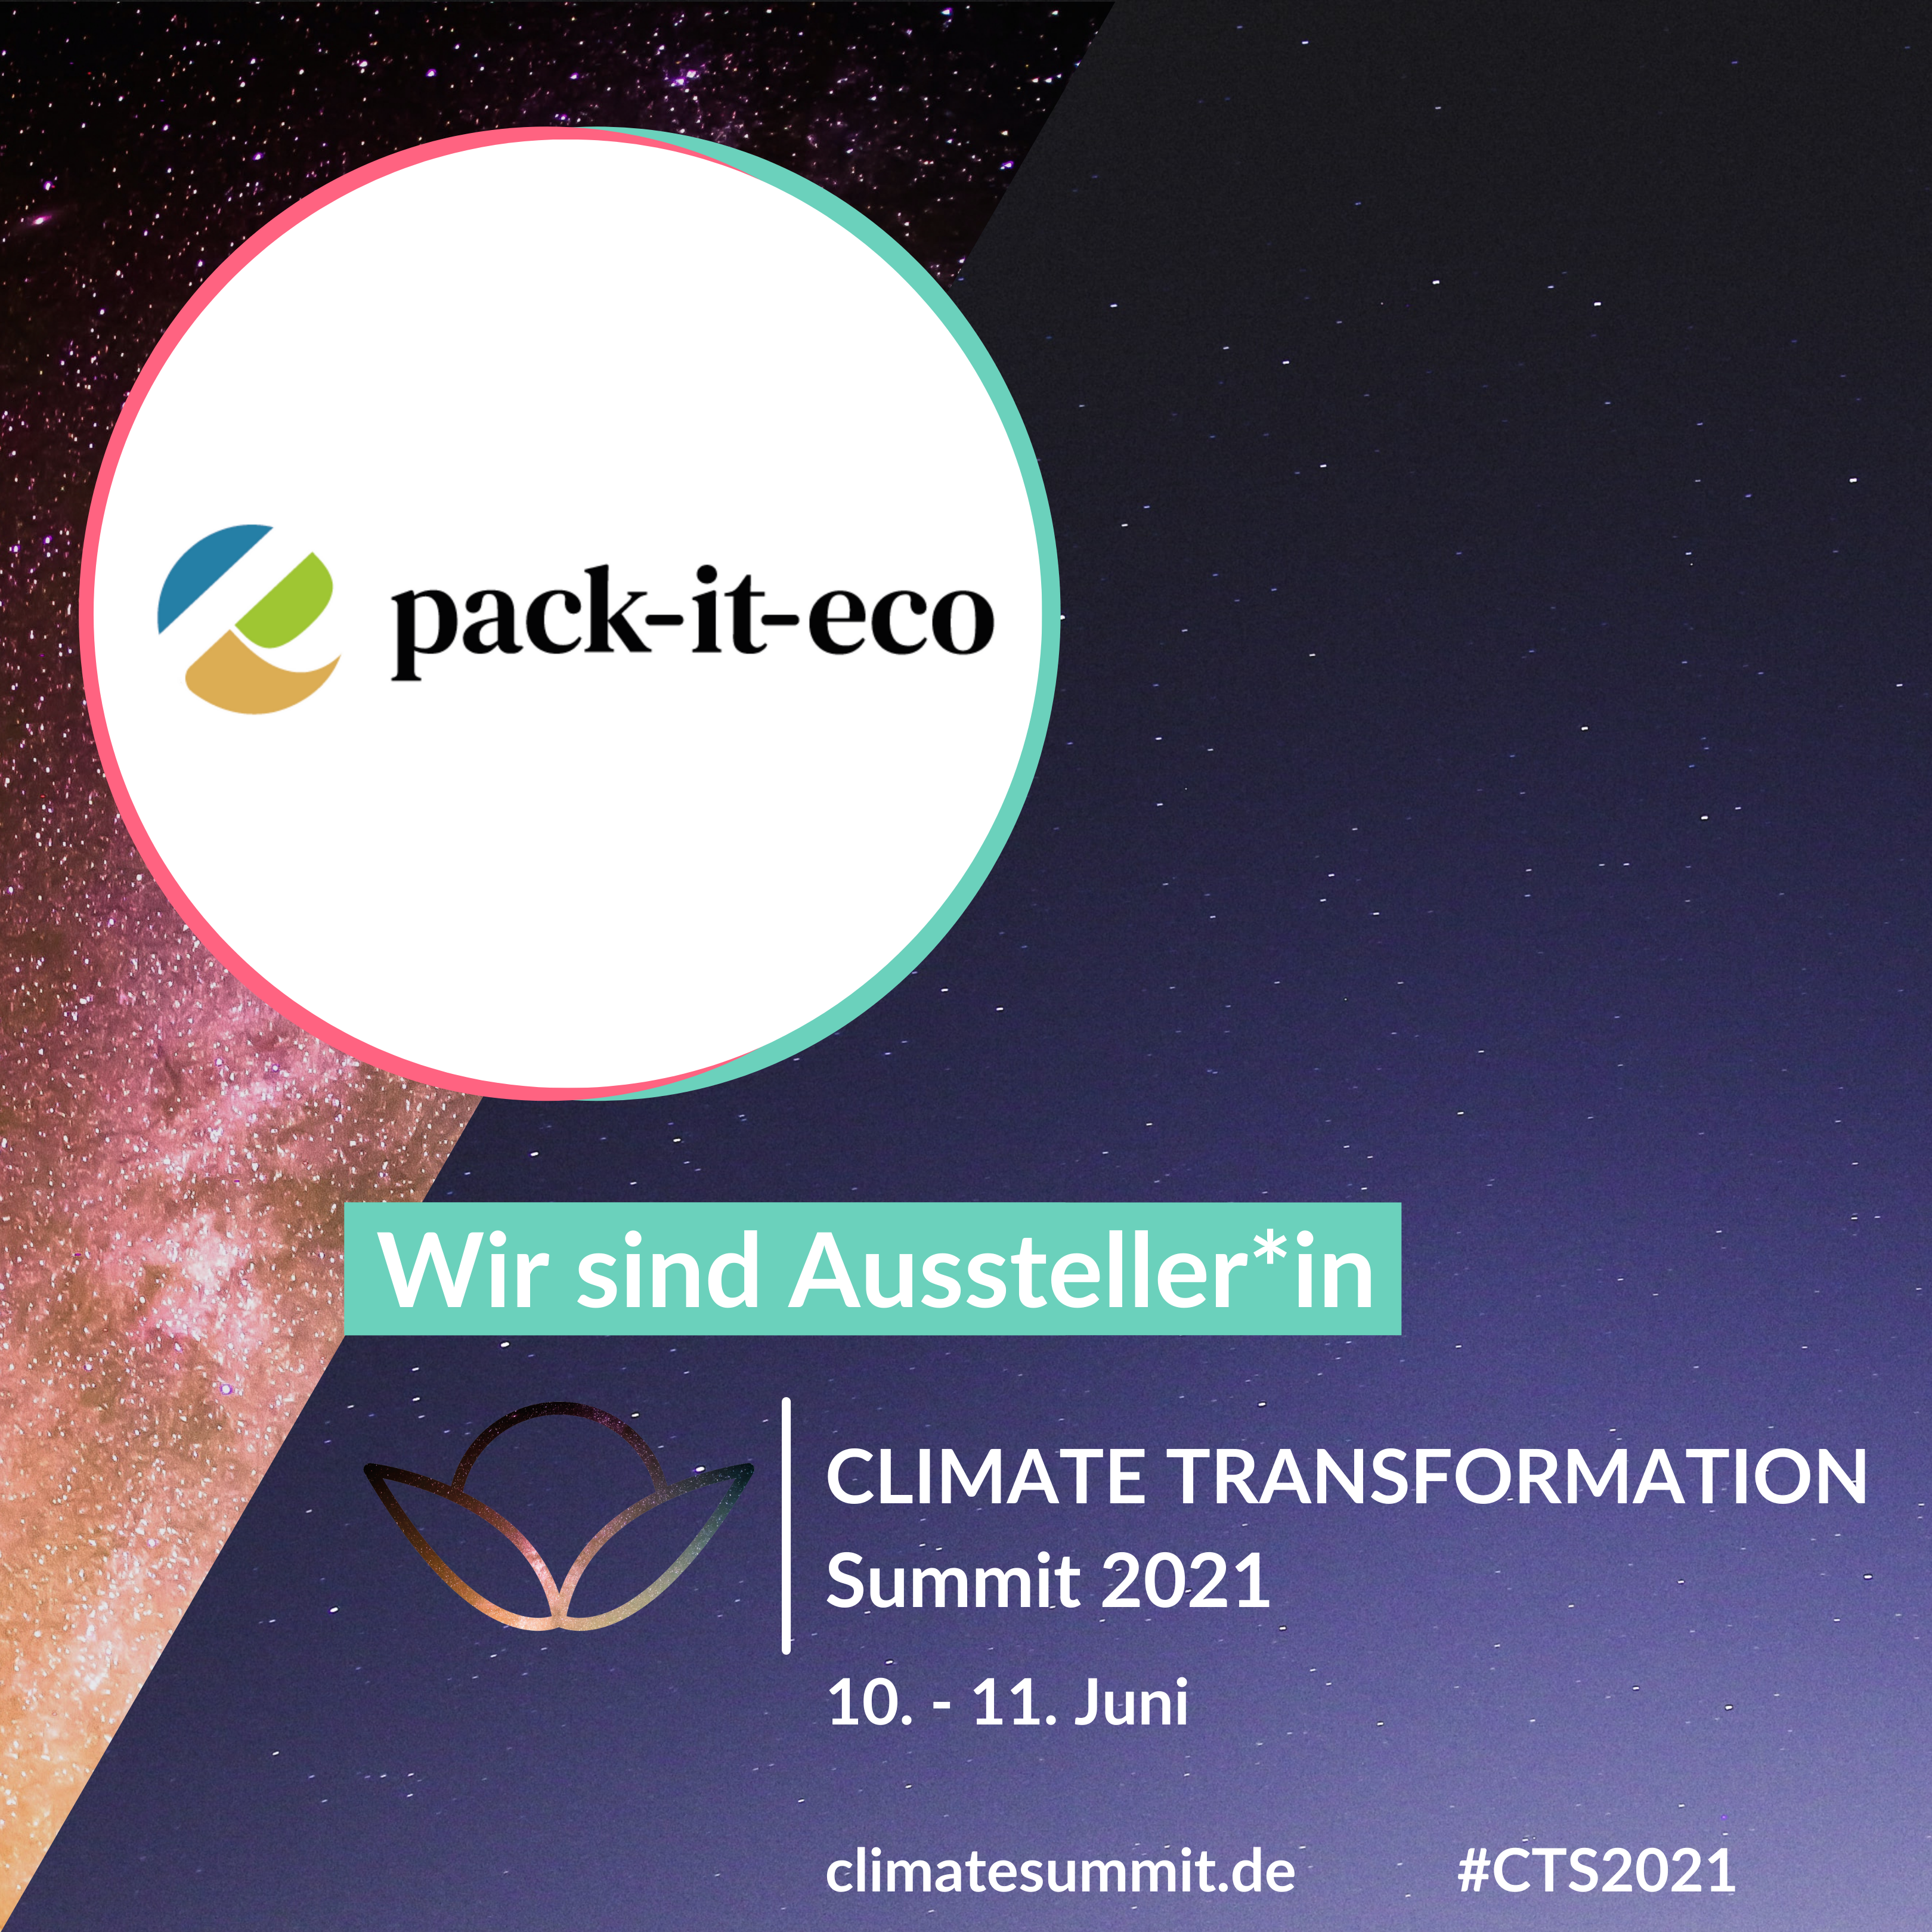 Climate Summit 2021 pack-it-eco